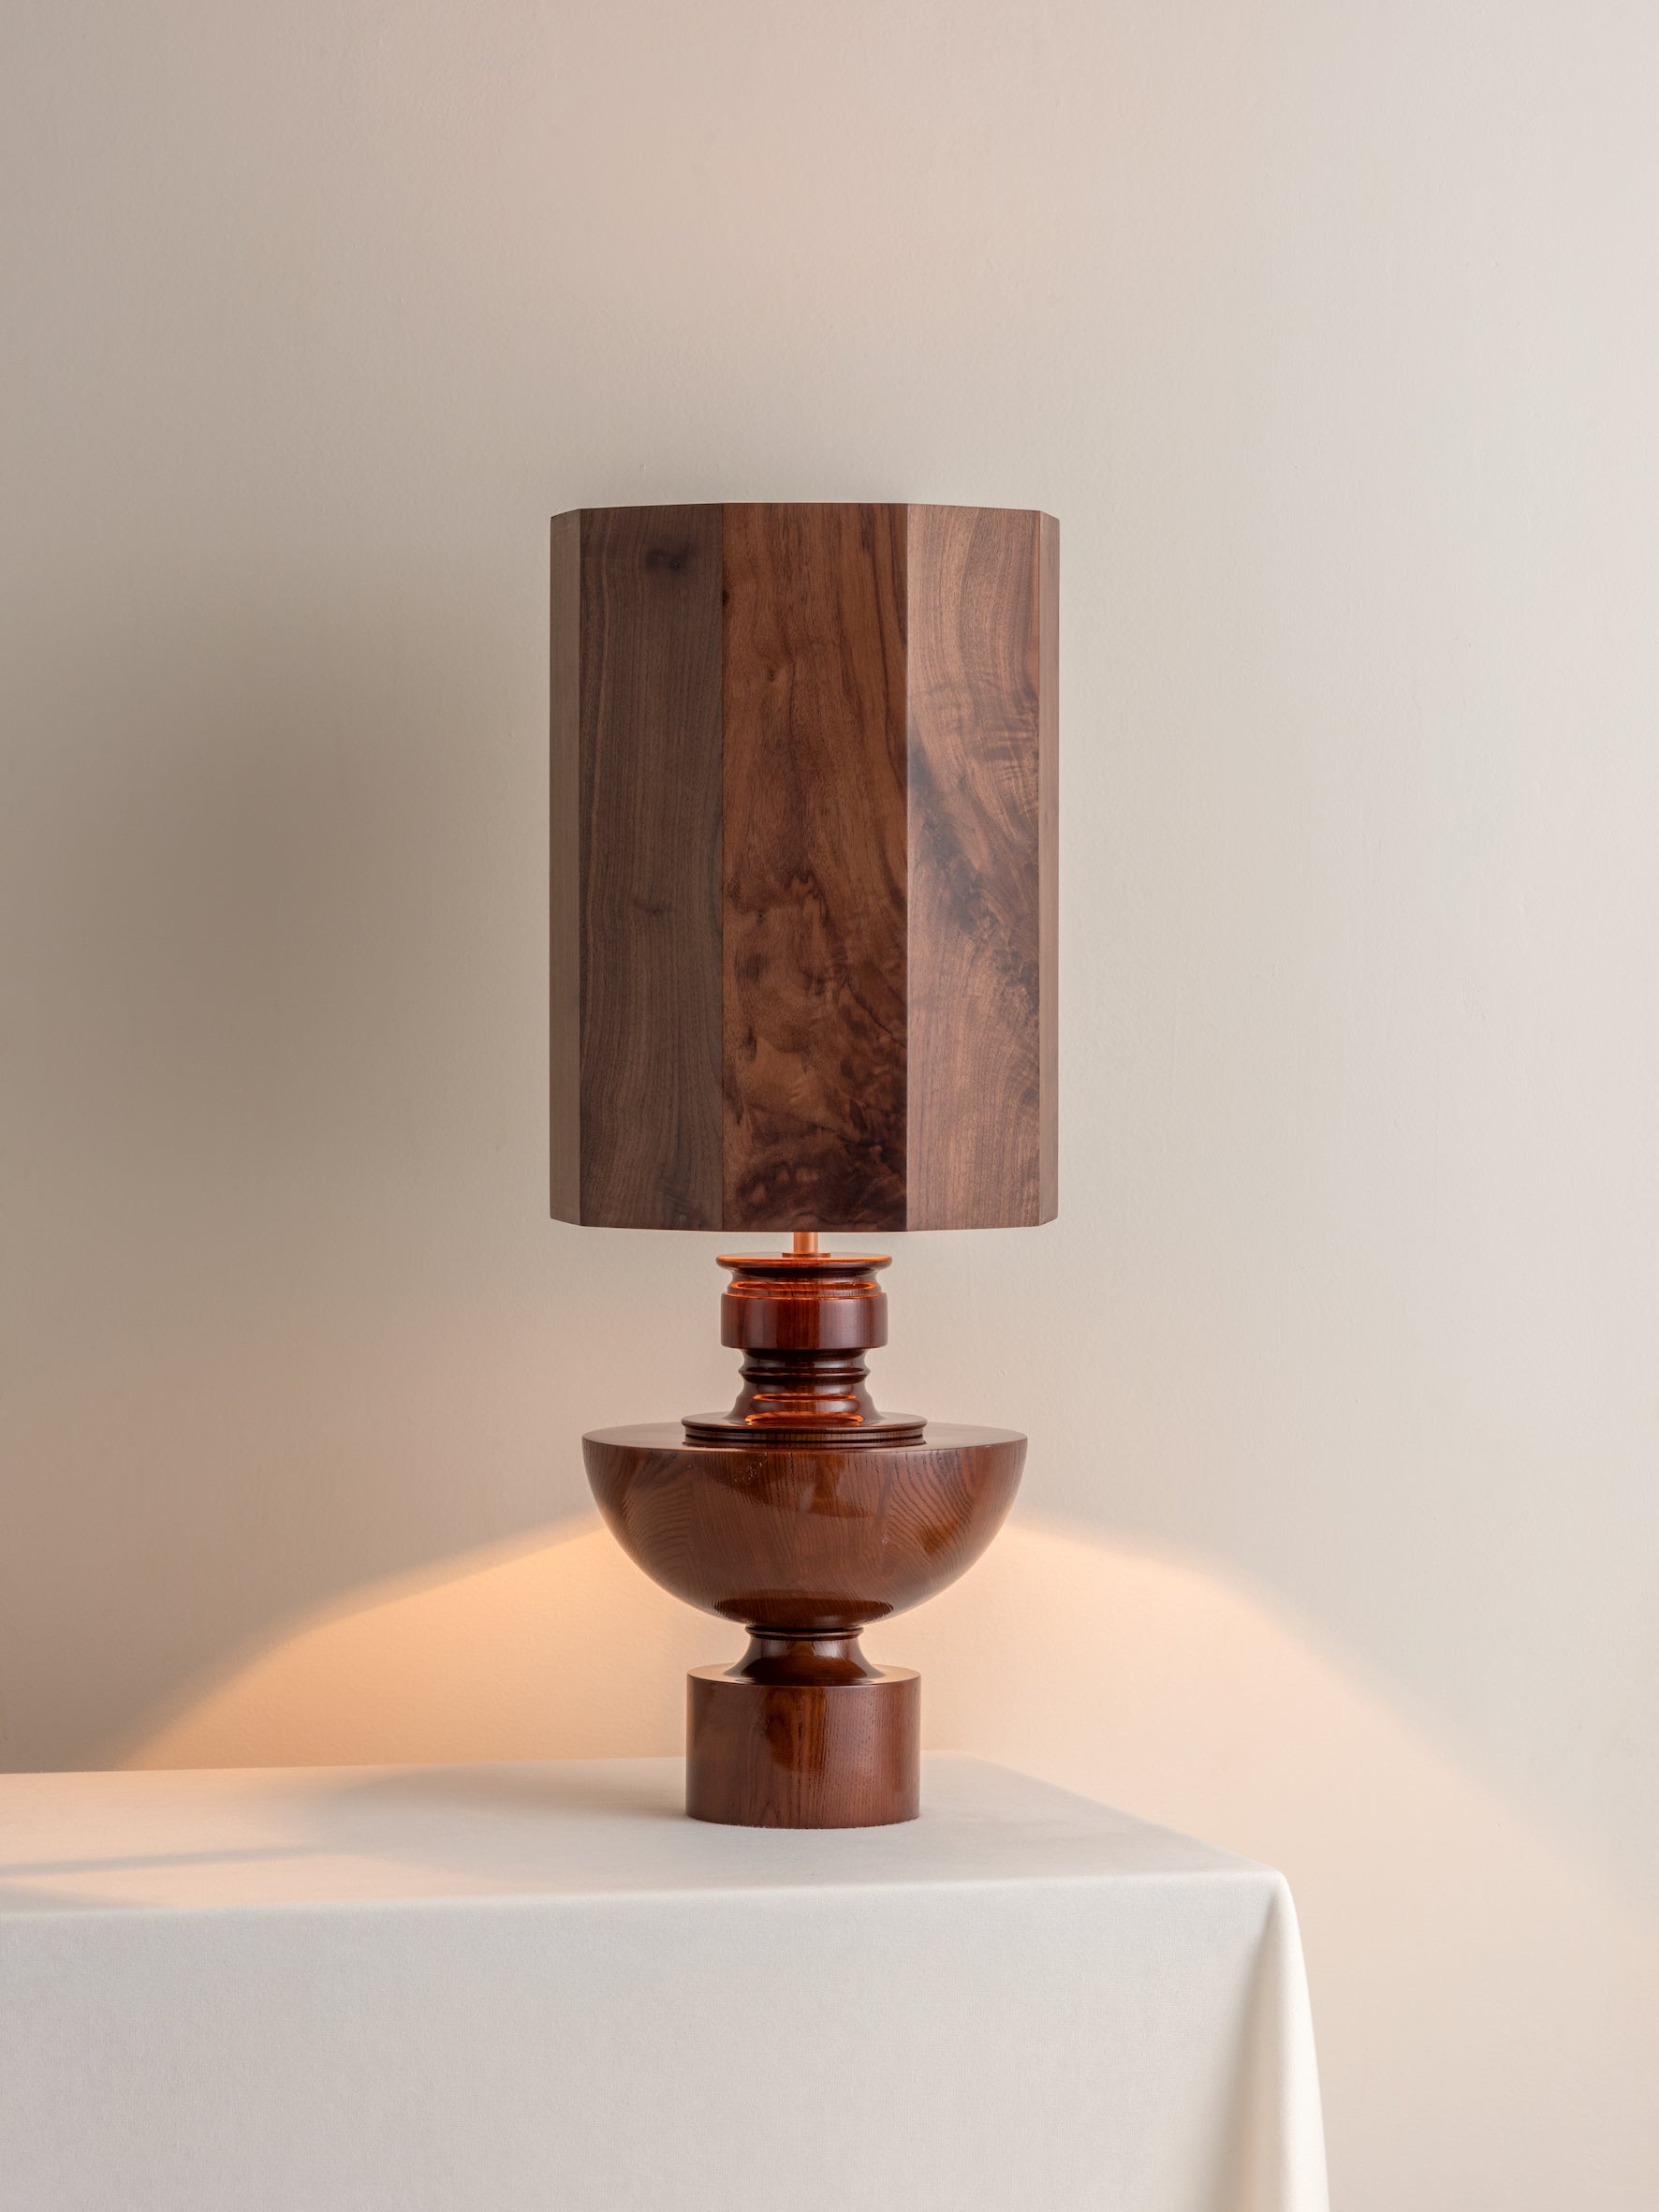 Editions spun wood lamp with + walnut wood shade | Table Lamp | Lights & Lamps | UK | Modern Affordable Designer Lighting